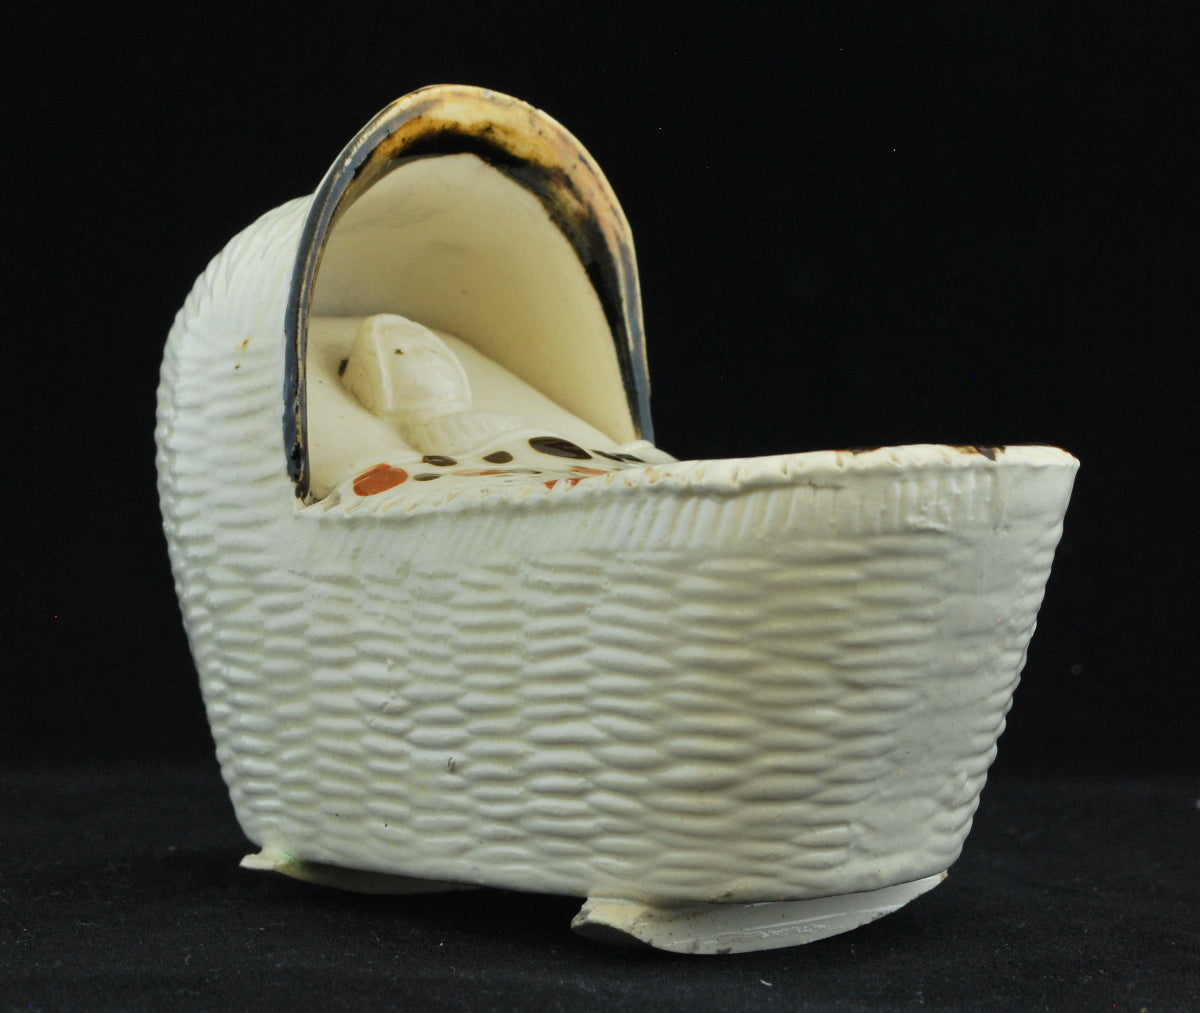 Cradle with infant